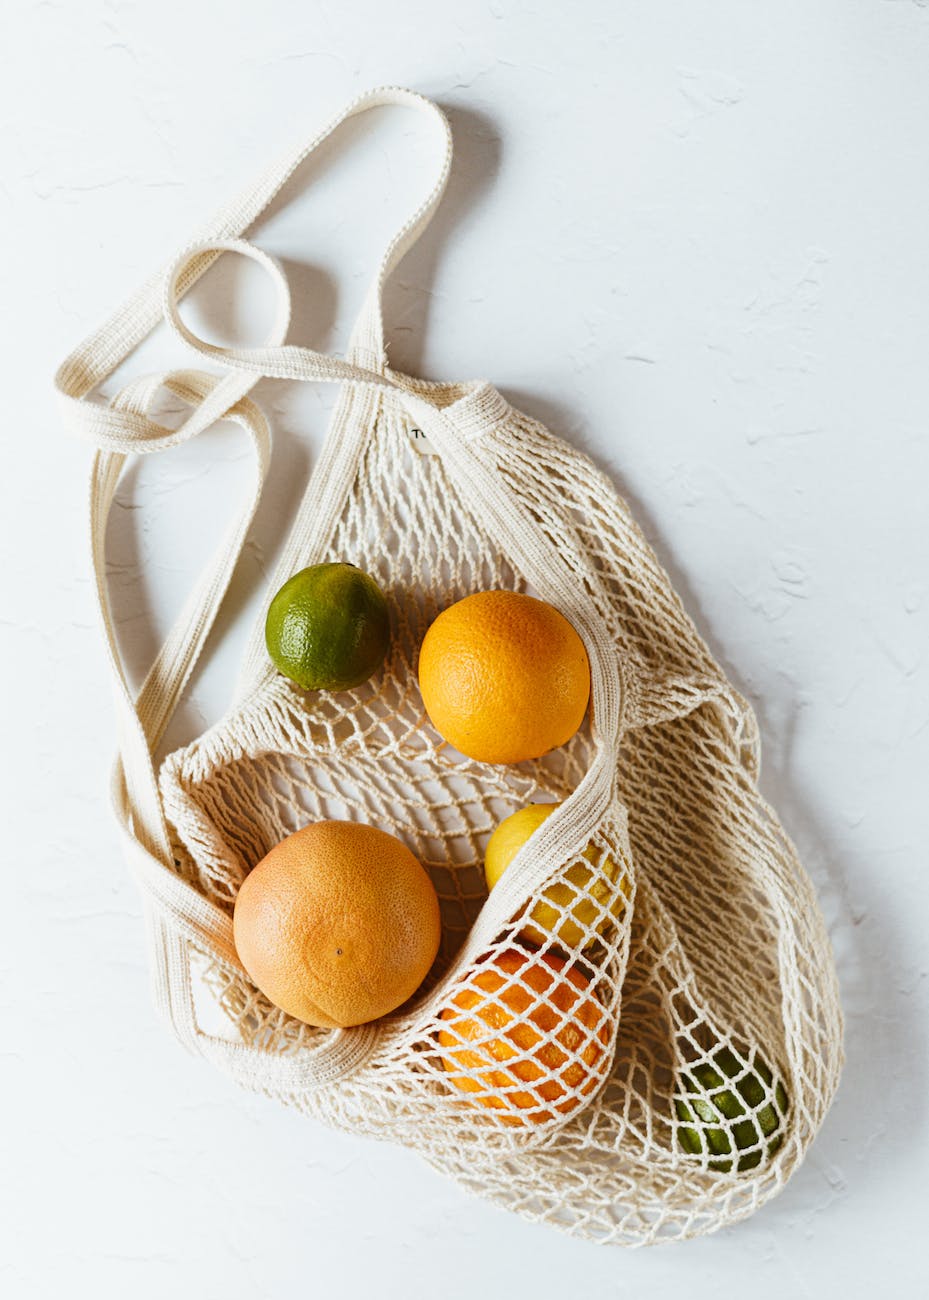 assorted citrus fruits in cotton sack on white surface